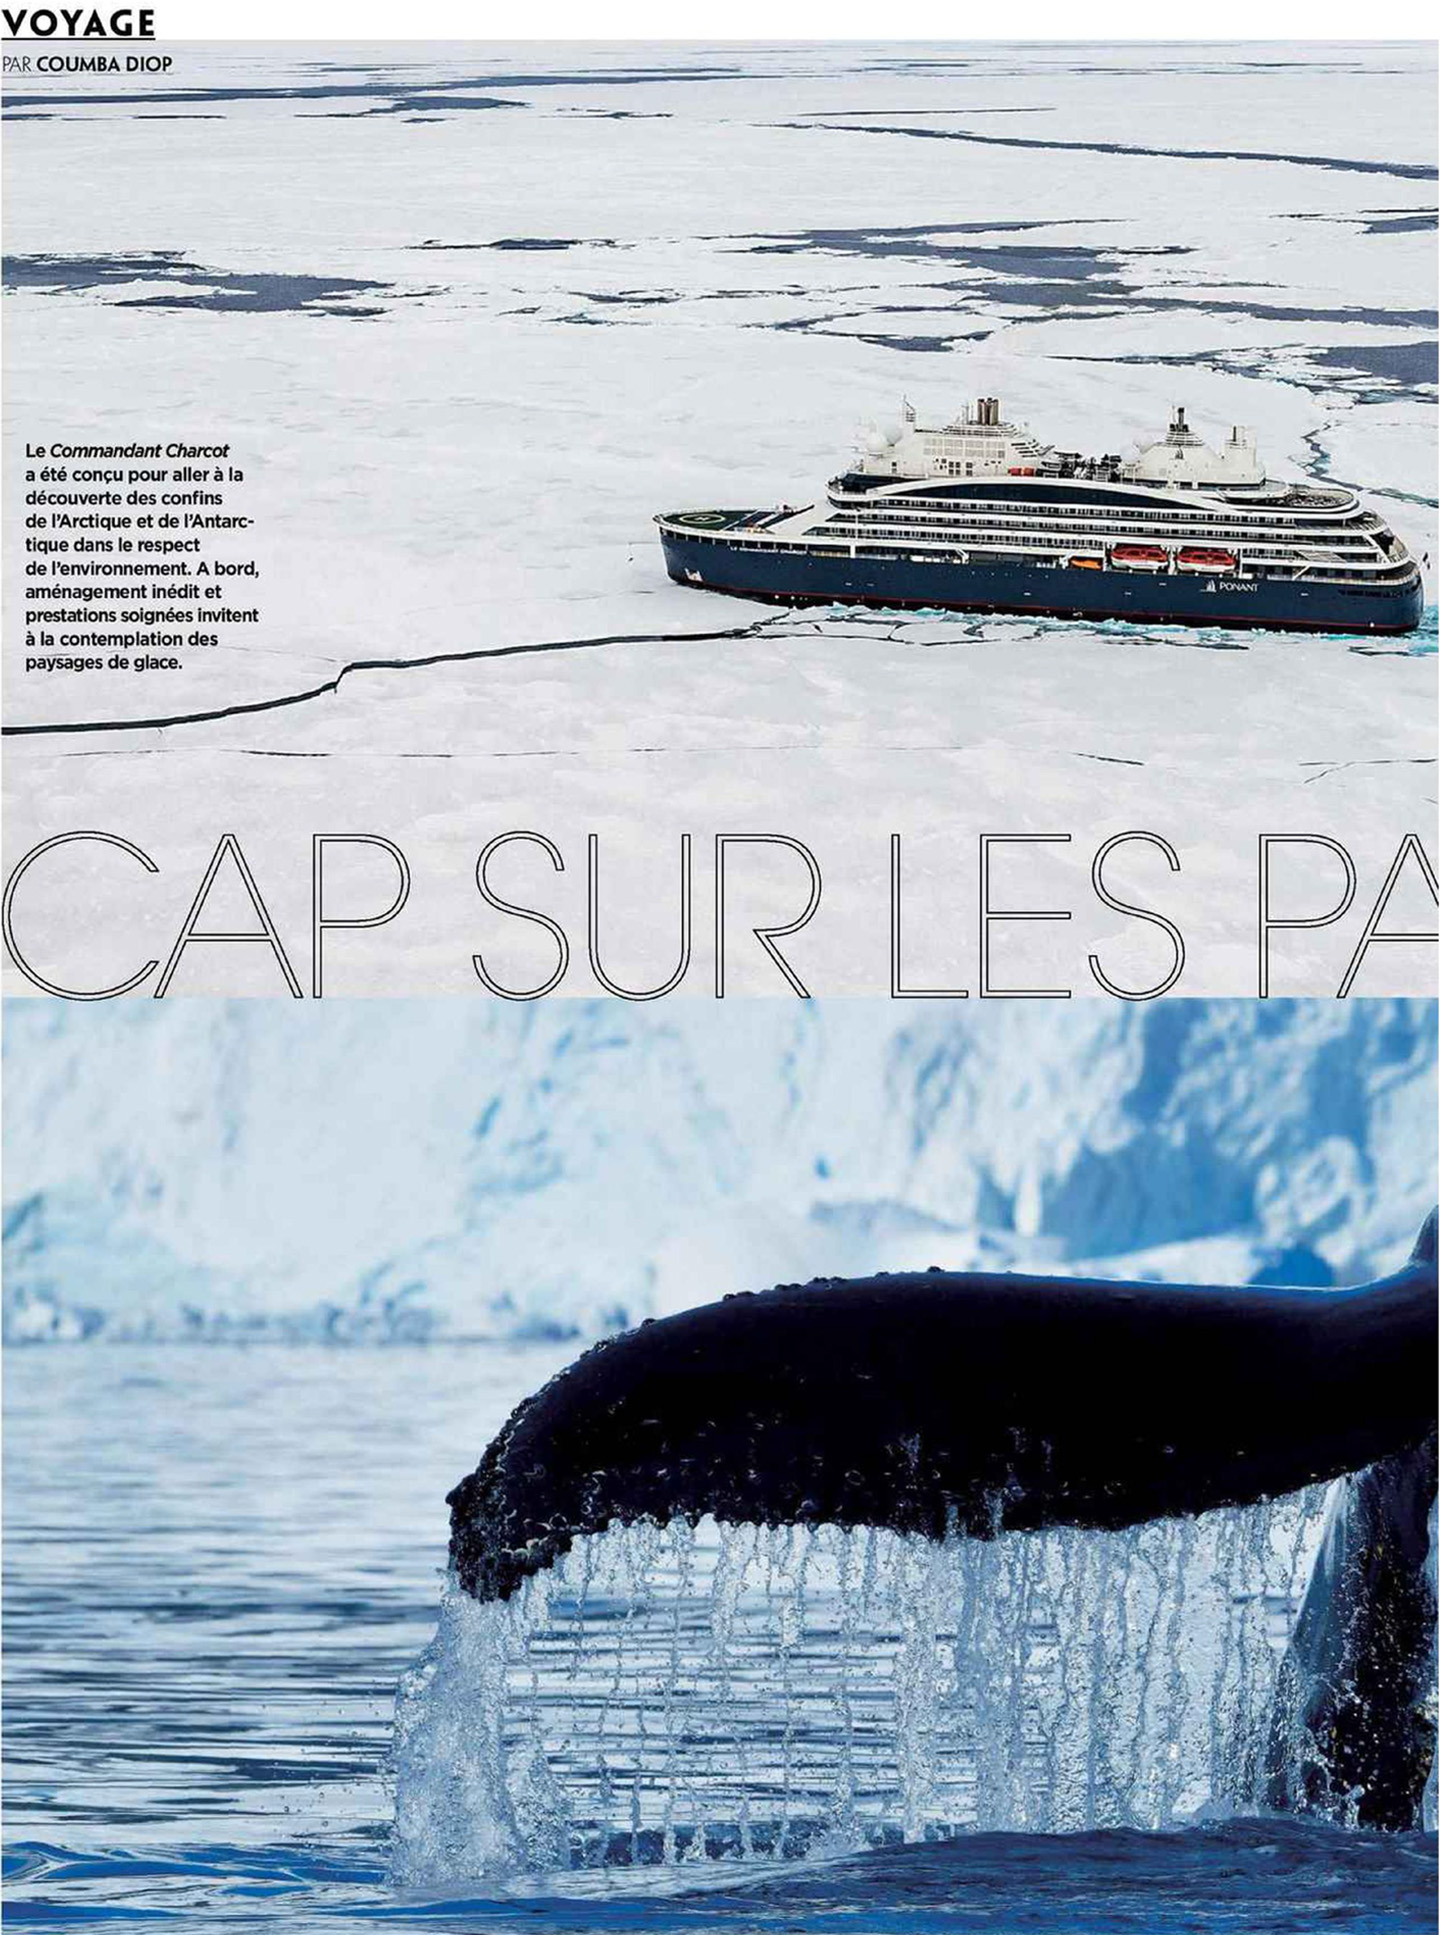 article on the commander charcot designed by jean-philippe nuel's interior design studio in gala magazine, luxury cruise ship, ponant